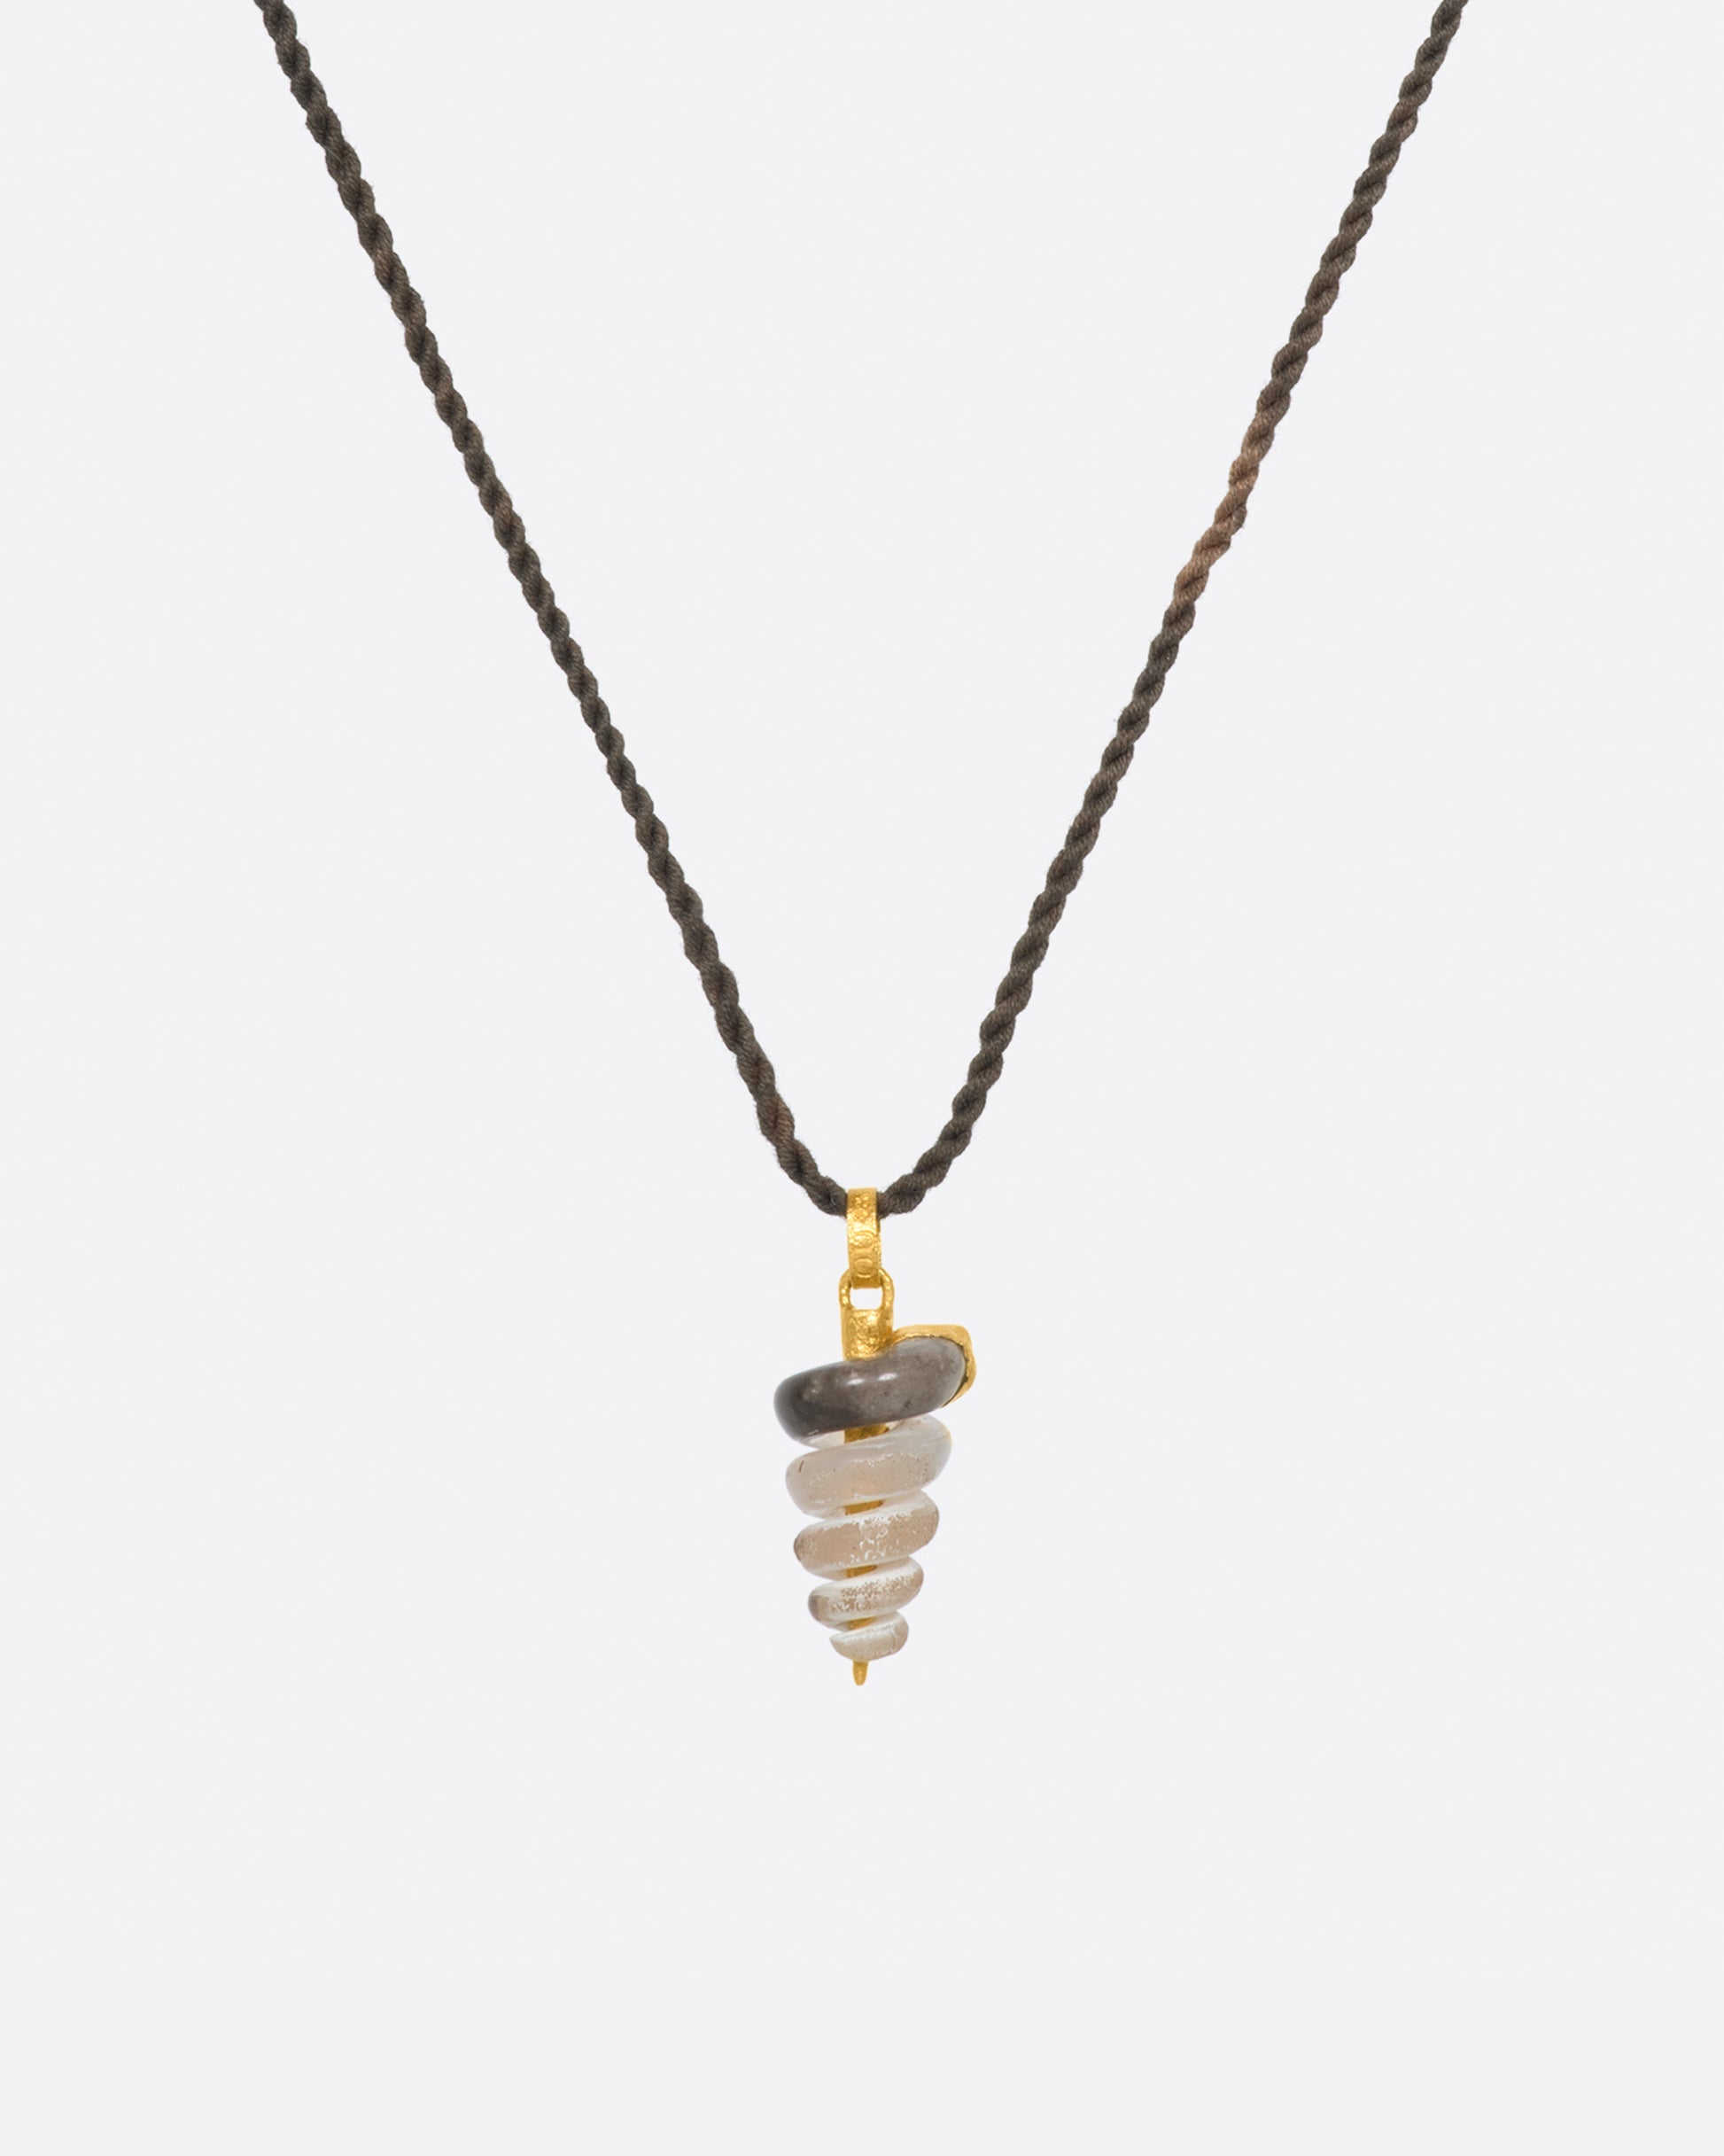 A fossilized snail pendant with gold winding its way down the inside